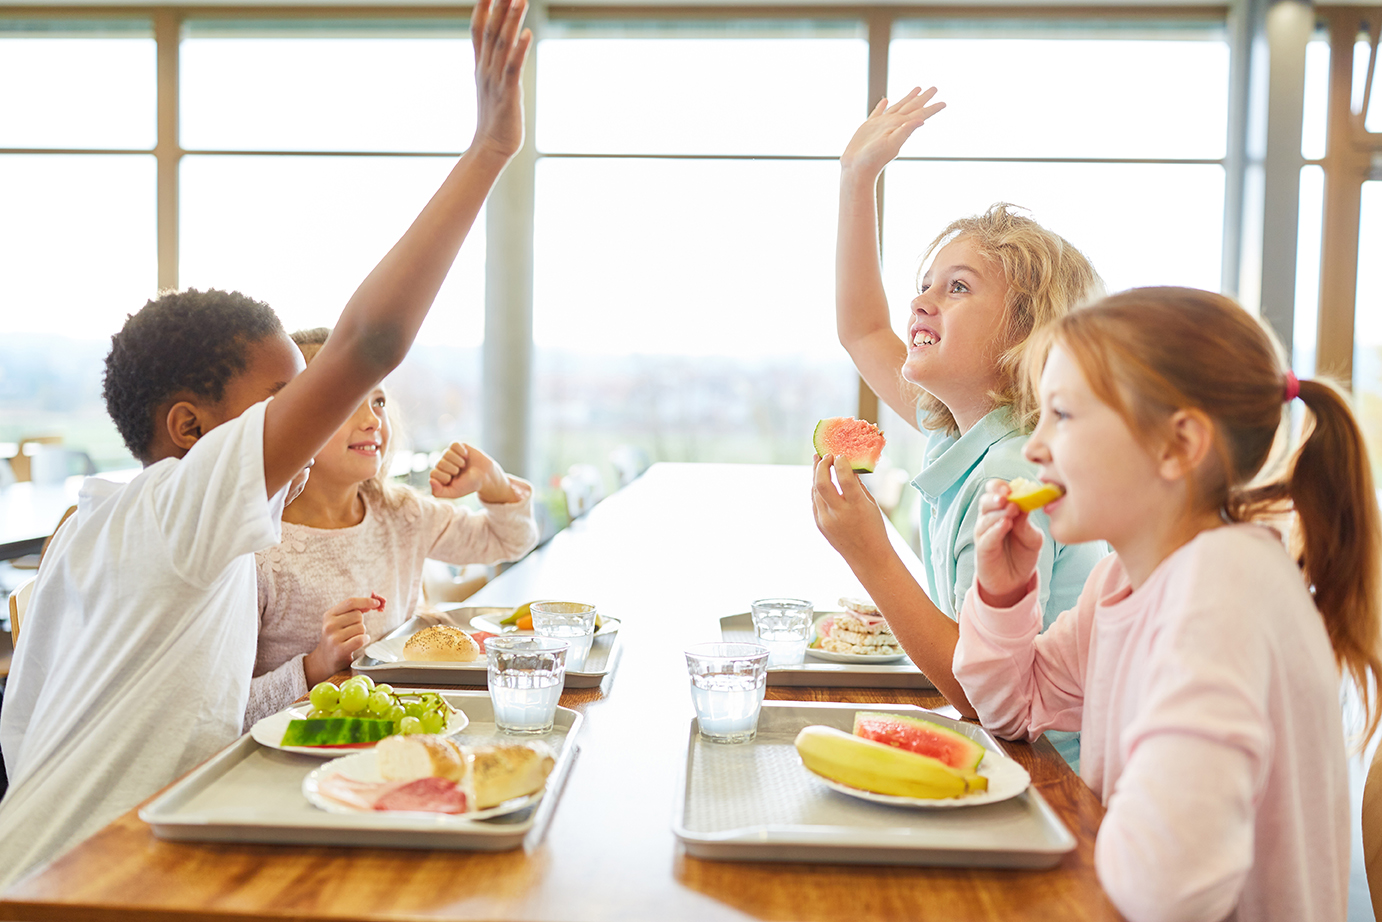 children high fiving while eating lunch